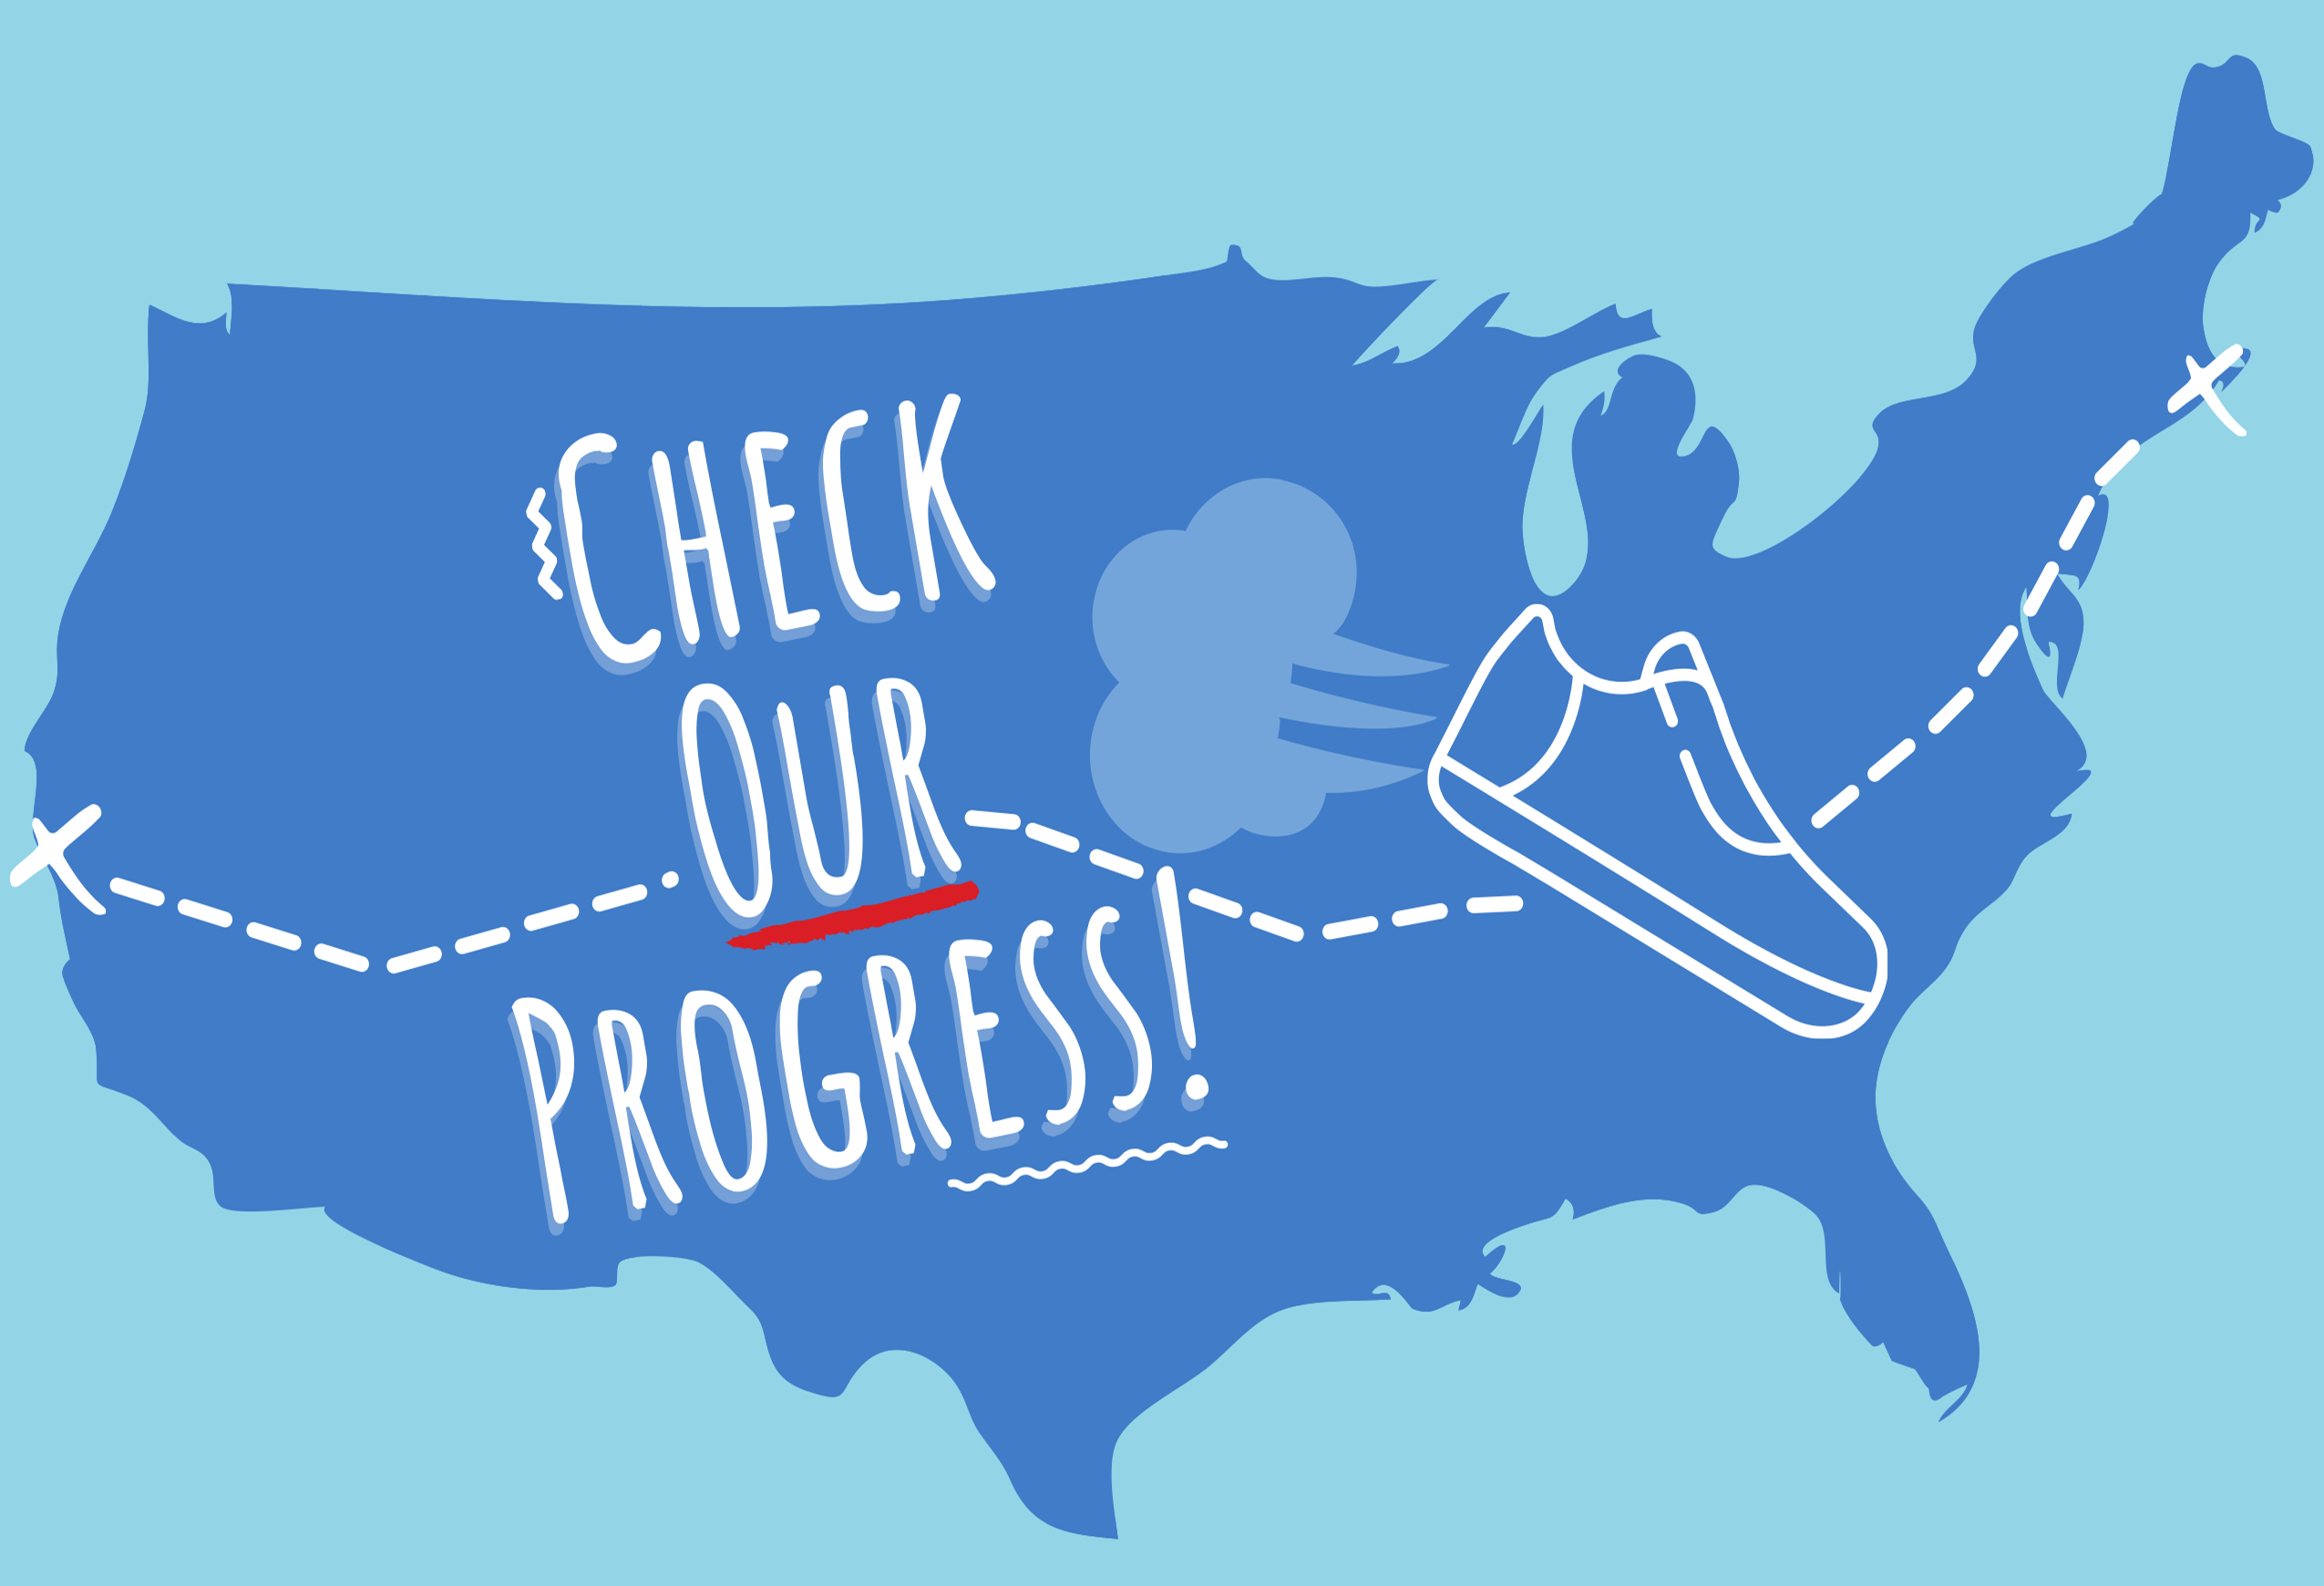 A blue map of the United States on a light blue background. There is a dashed white line between San Francisco and Boston and each city is marked with a white x. The text "Check our Progress" appears in the middle of the map with white and red highlights. The white outline of a running shoe appears to the right of the text angled toward Bosotn. There is a light blue puff of smoke coming out of the back of the shoew. 